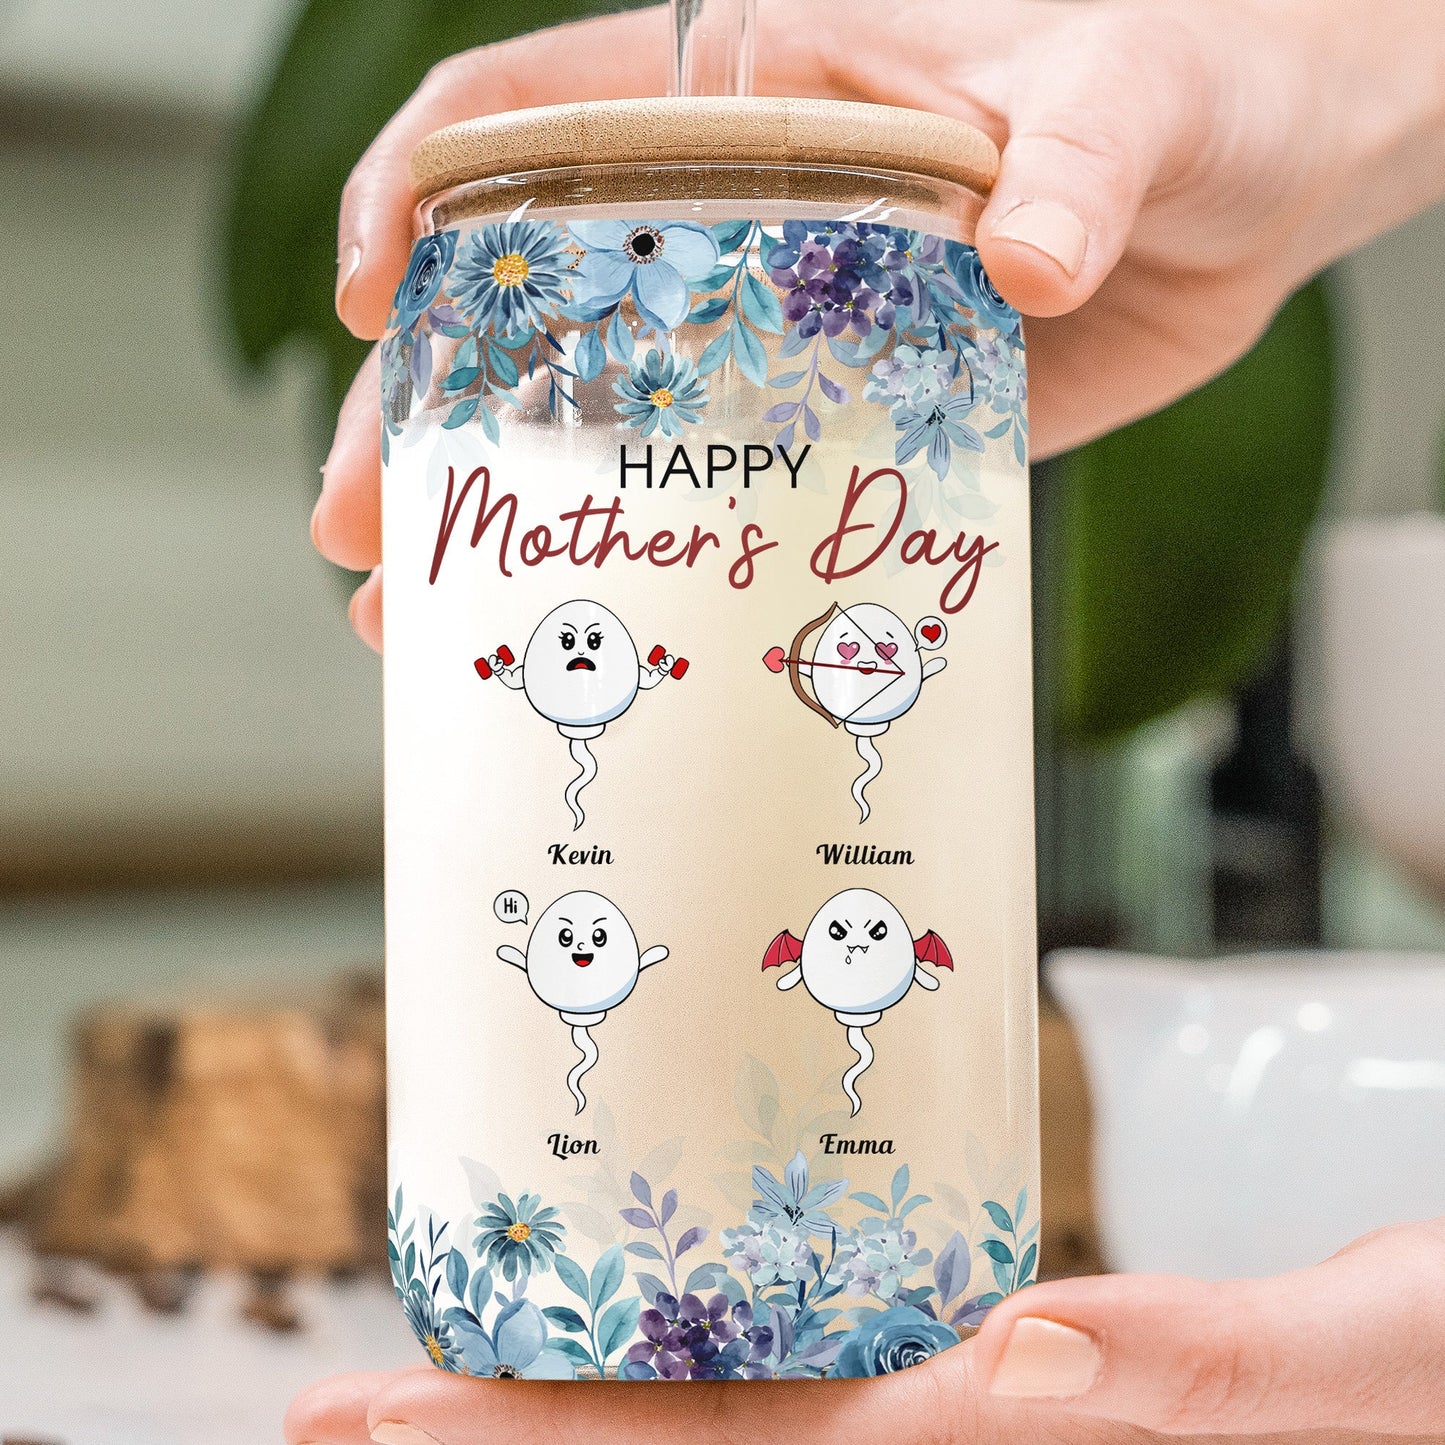 Dear Mom We're So Glad You Didn't Swallow Us - Personalized Clear Glass Cup